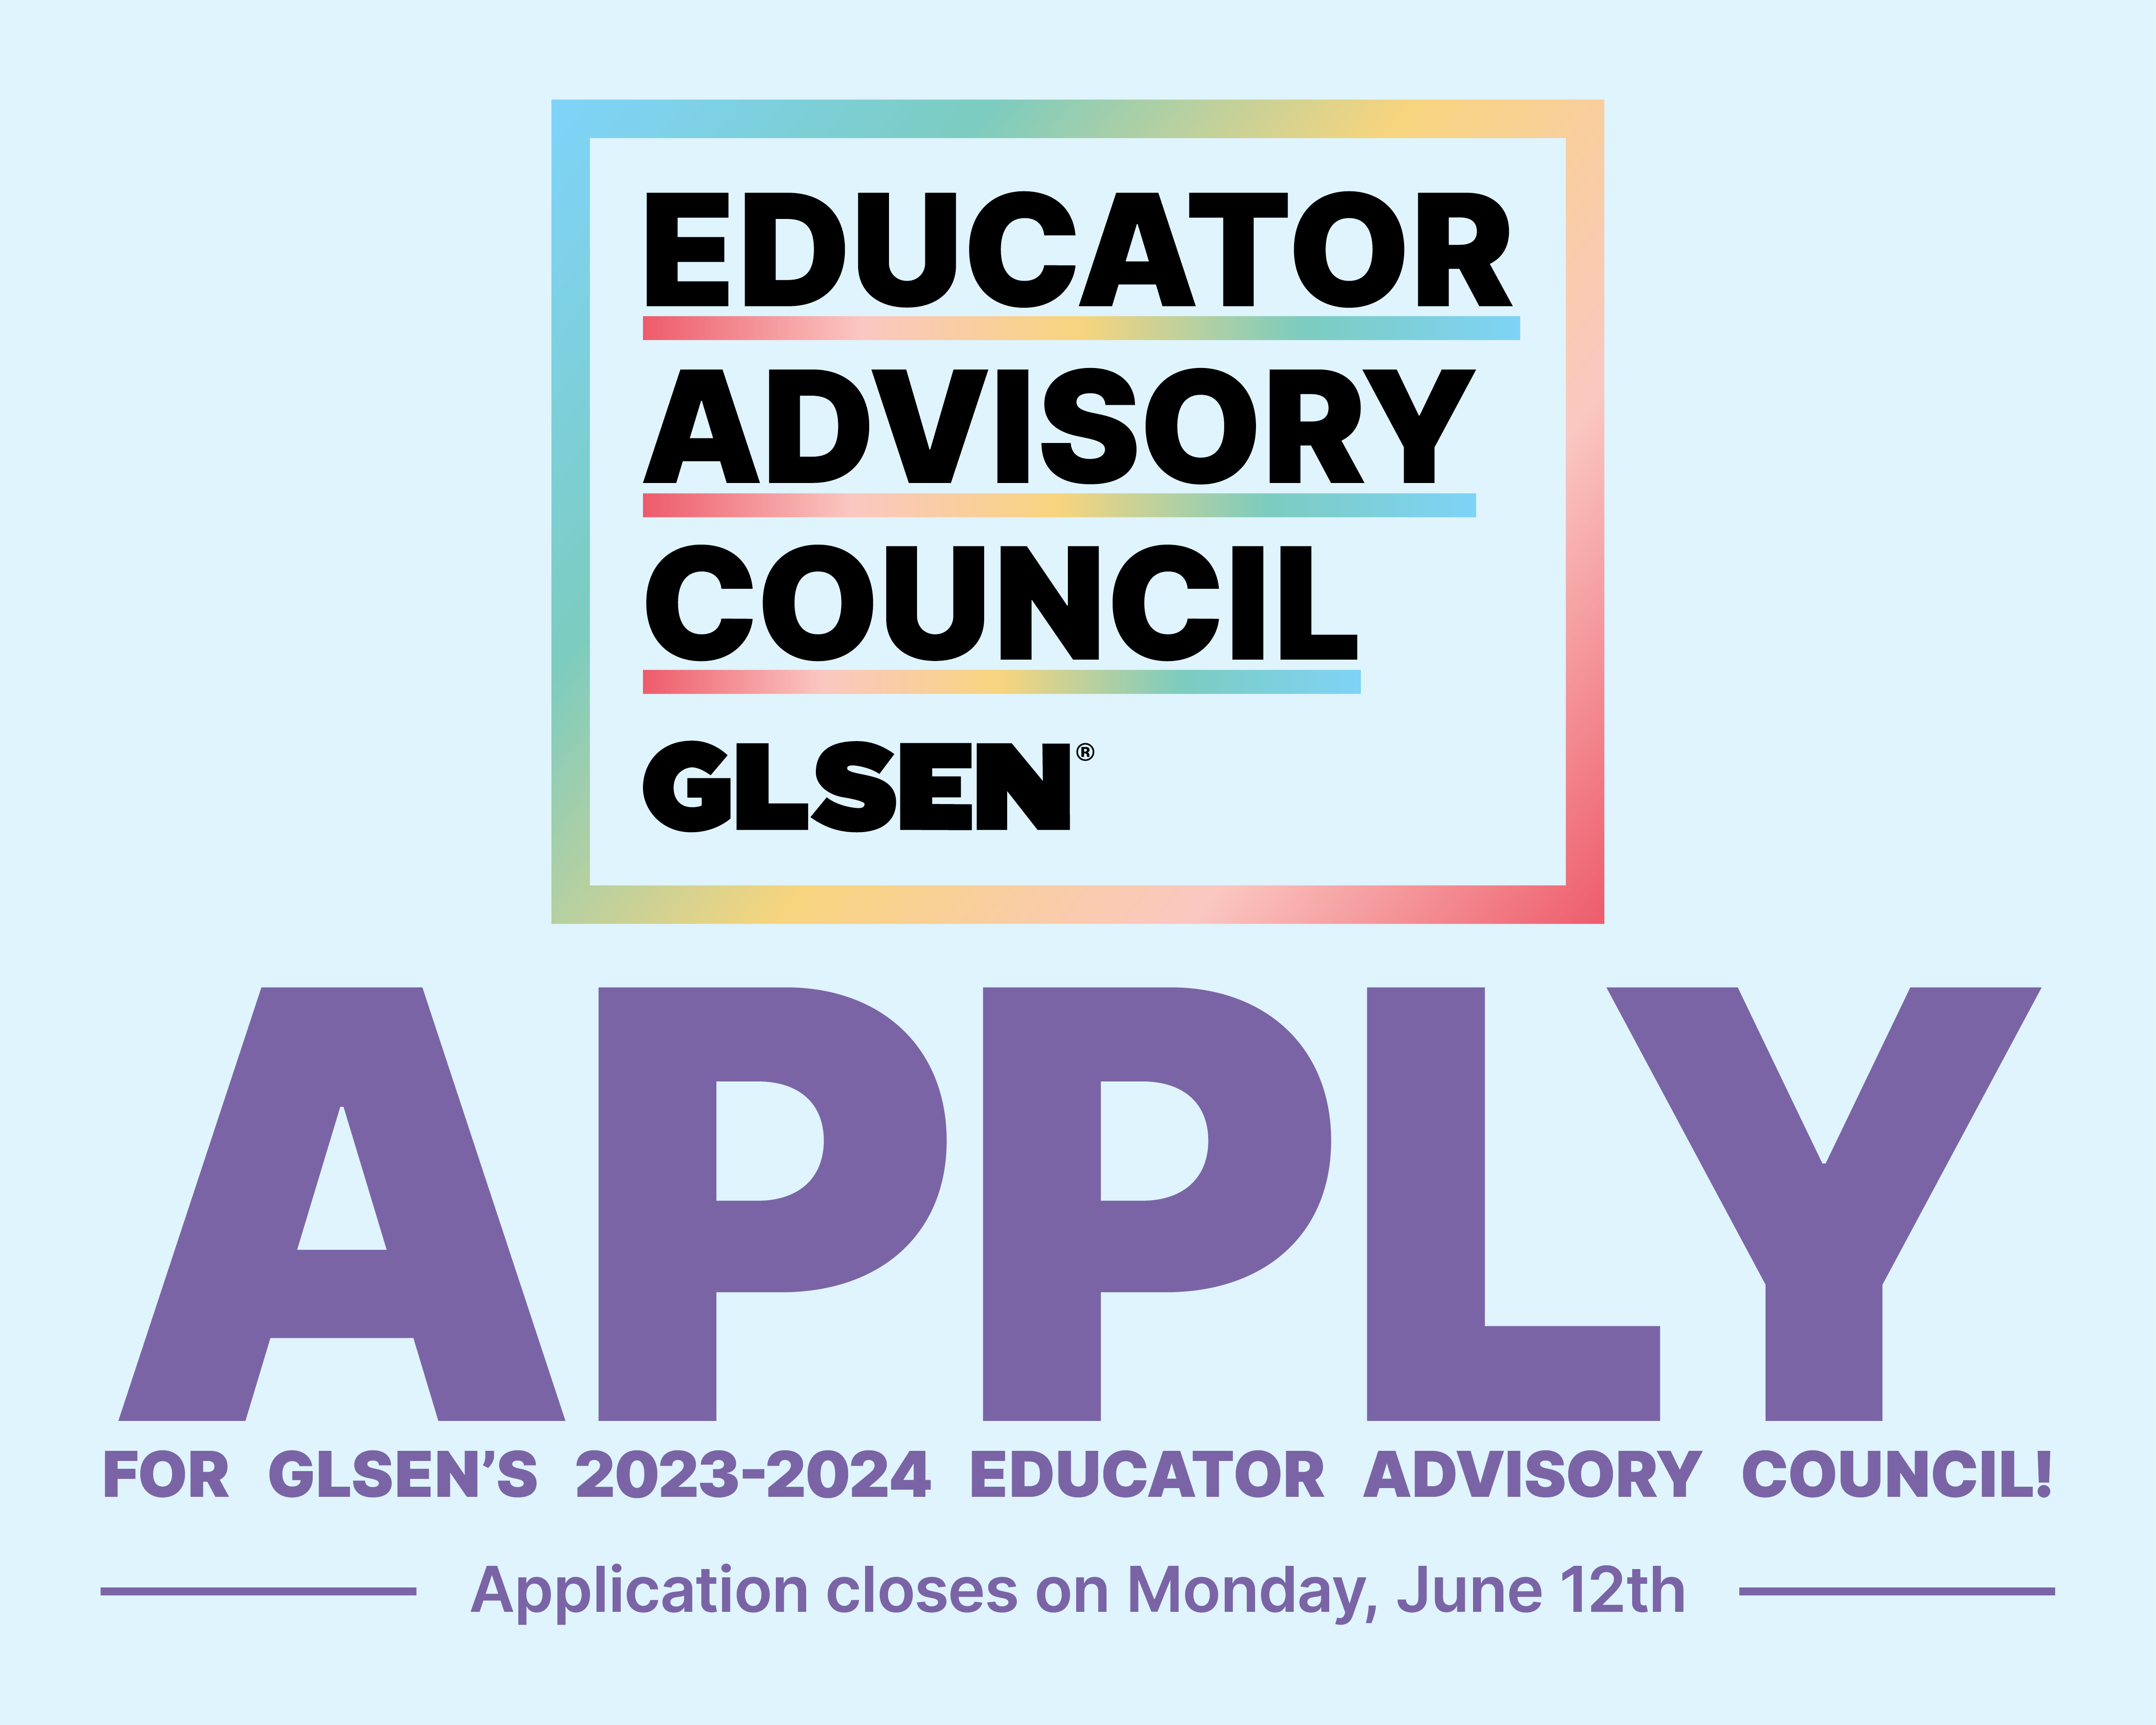 Apply for the Educator Advisory Council today! Applications are due June 12th. 